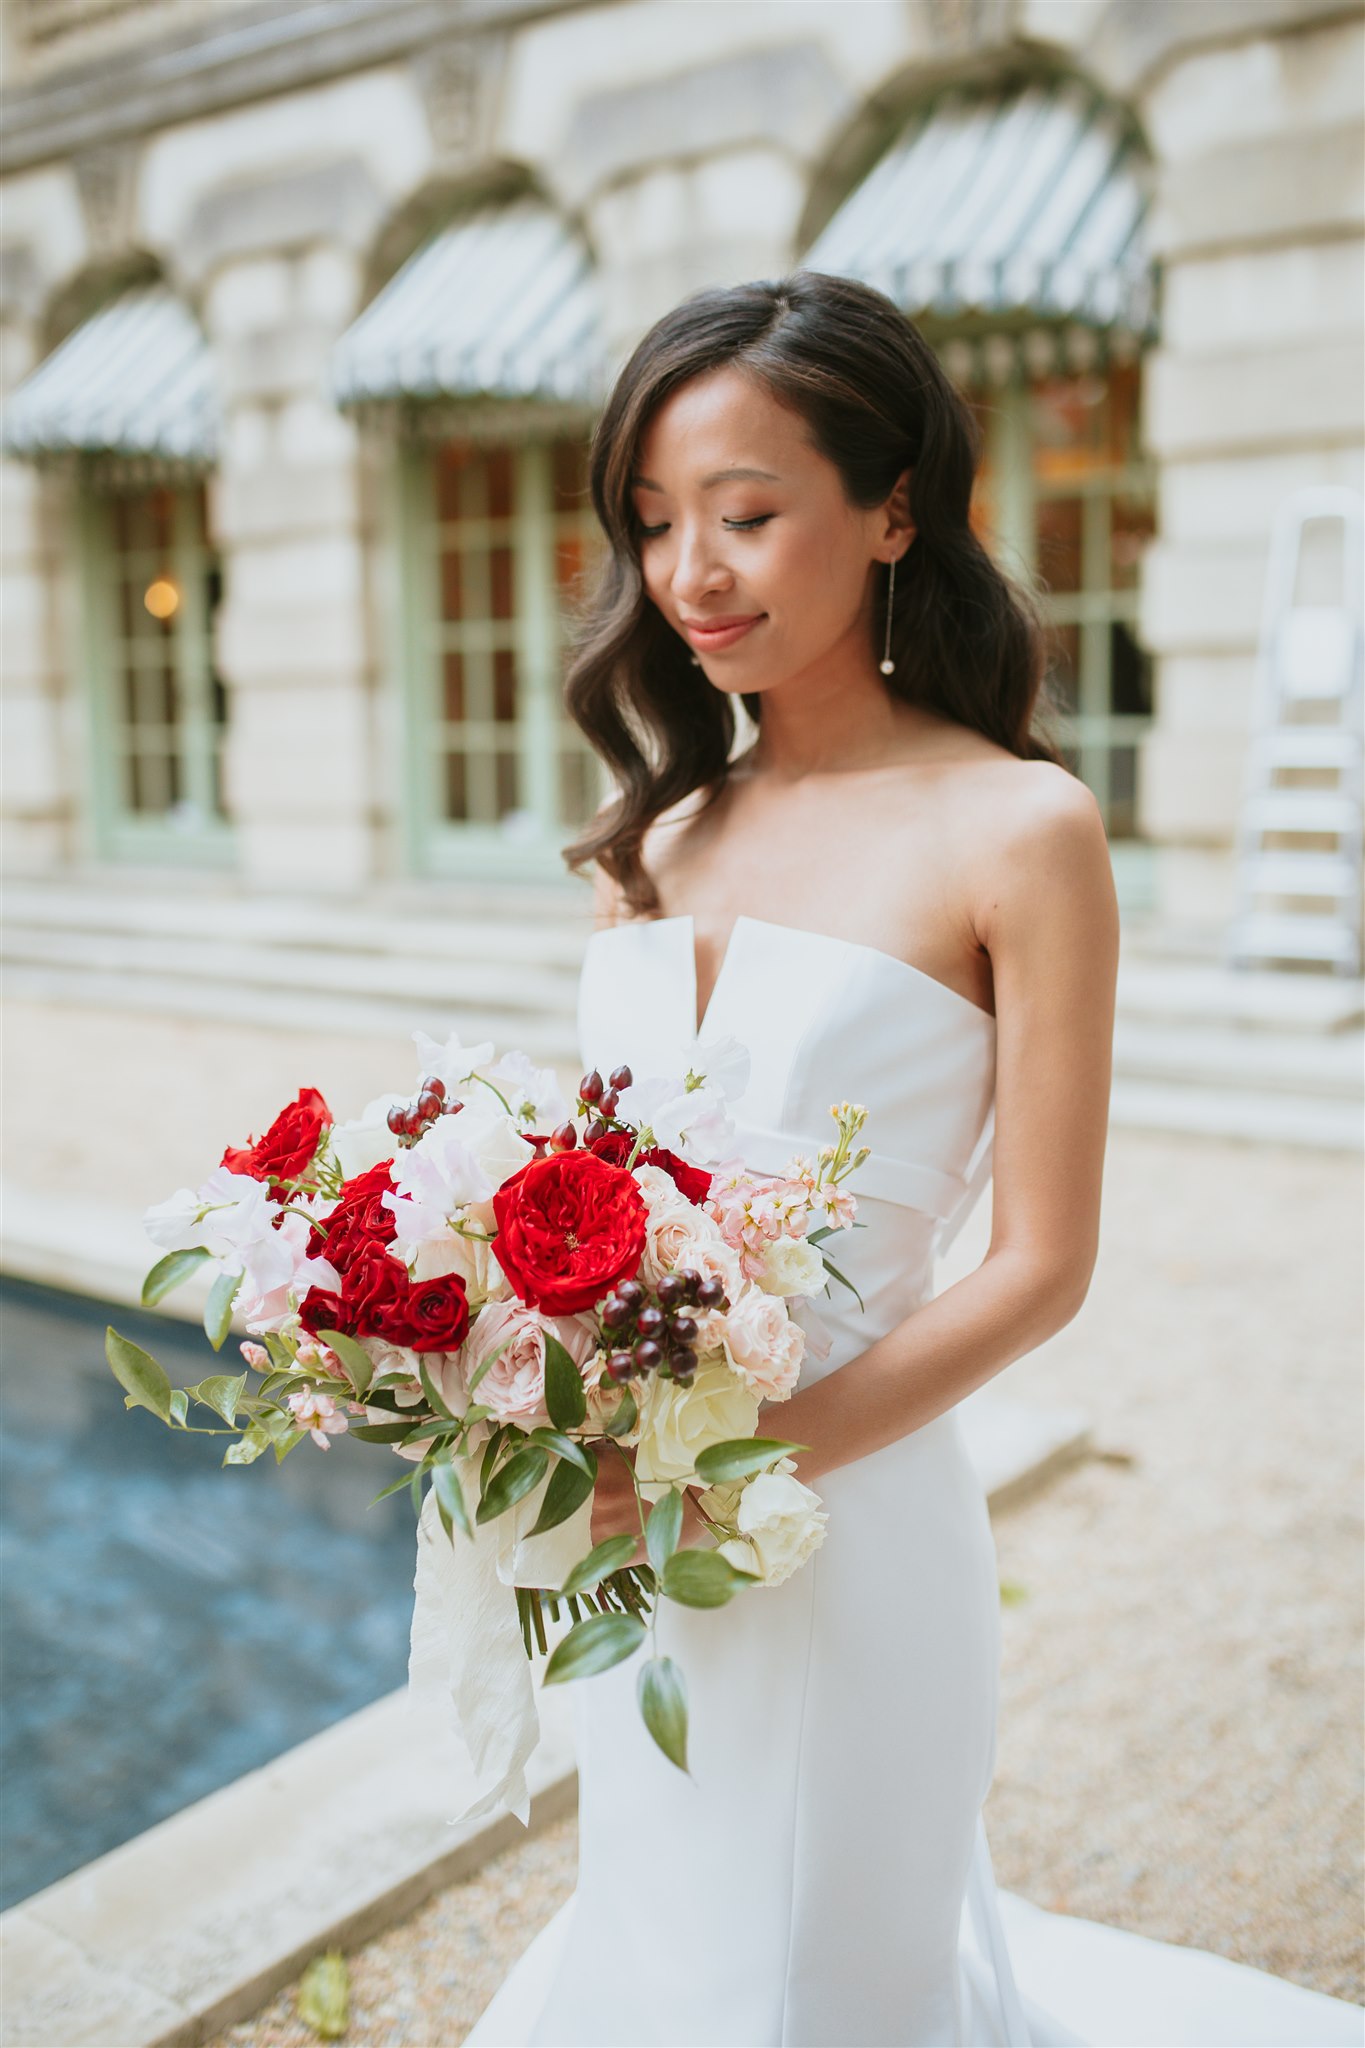 Embracing Vibrance: Top 10 Colorful Wedding Bouquets That Make a Statement, Justin Kunimoto